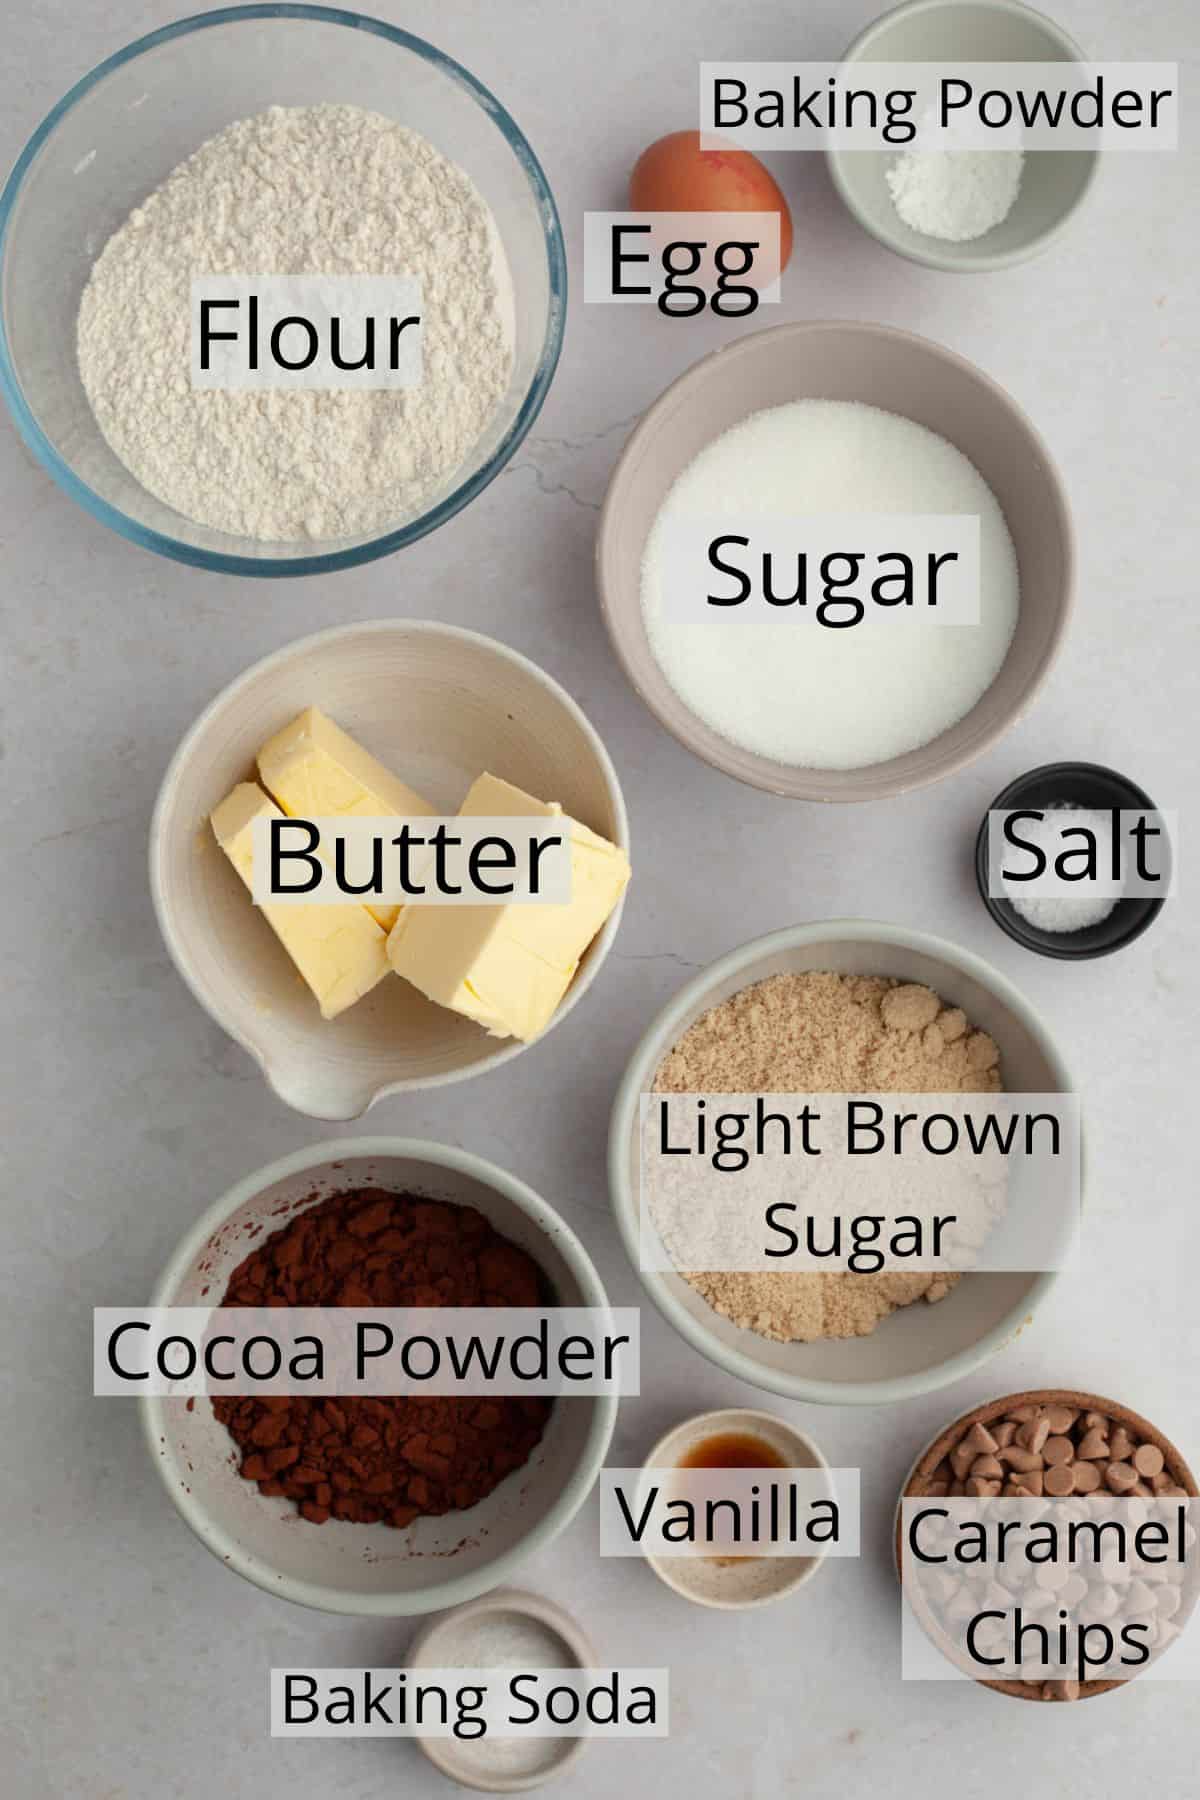 All the ingredients needed to make chocolate caramel cookies weighed out into small bowls.